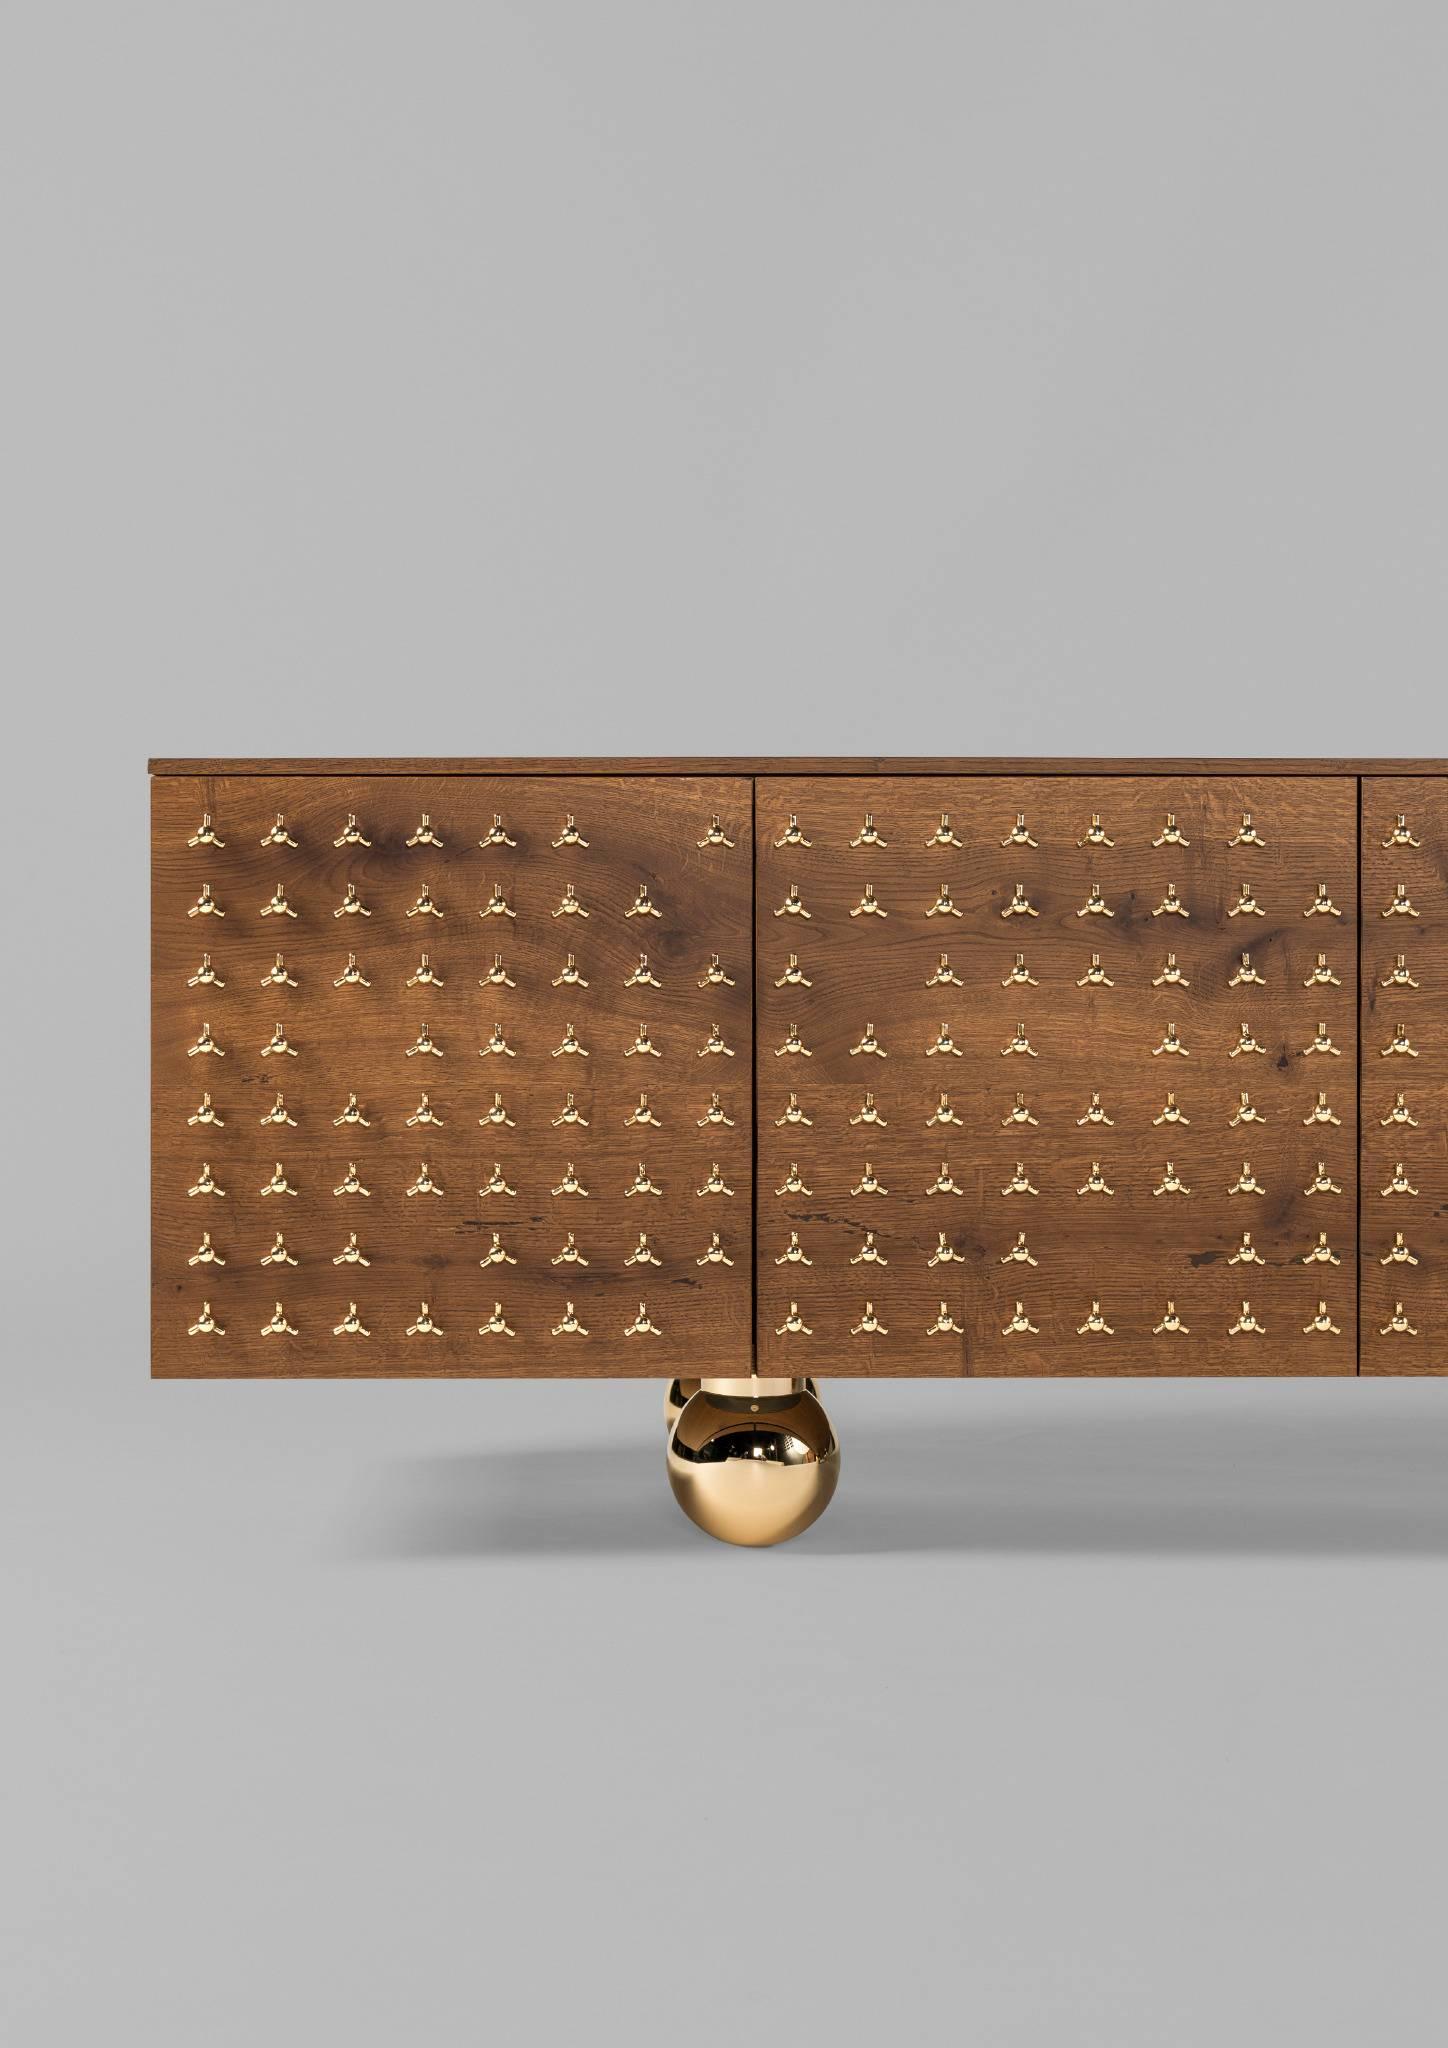 Remix cabinet designed by Ramon Ubeda.
Manufactured by BD.

Limited edition of 3.

Container, frontals and shelves veneered in natural stained dark oak. Legs in aluminium with a brass coat. Accessories in polished varnished brass.